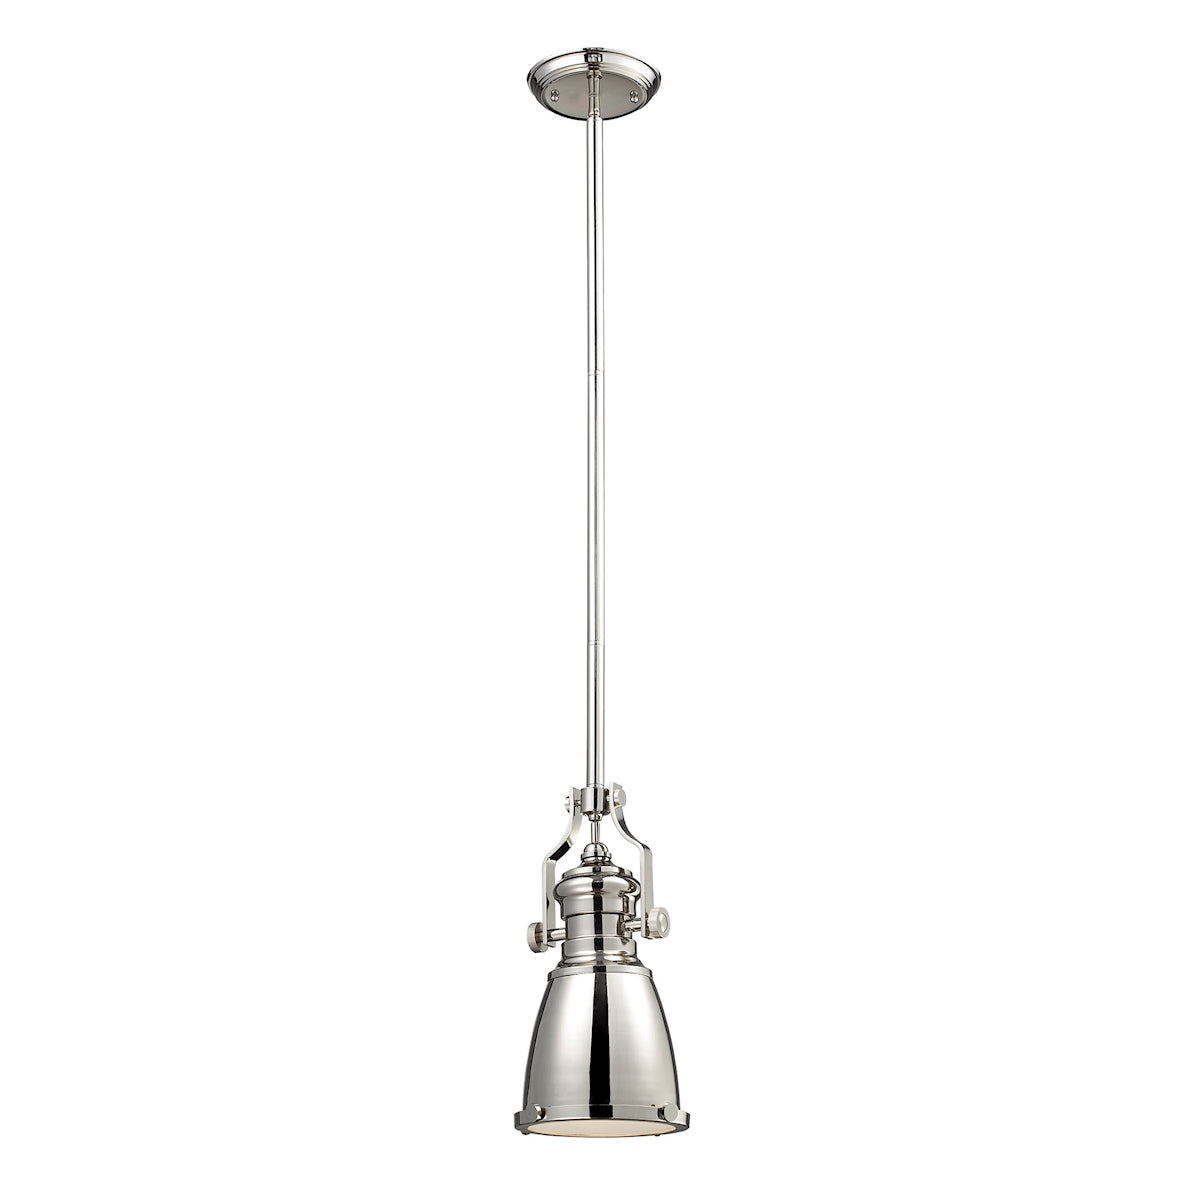 ELK Lighting 66159-1 Chadwick 1-Light Mini Pendant in Polished Nickel with Matching Shade